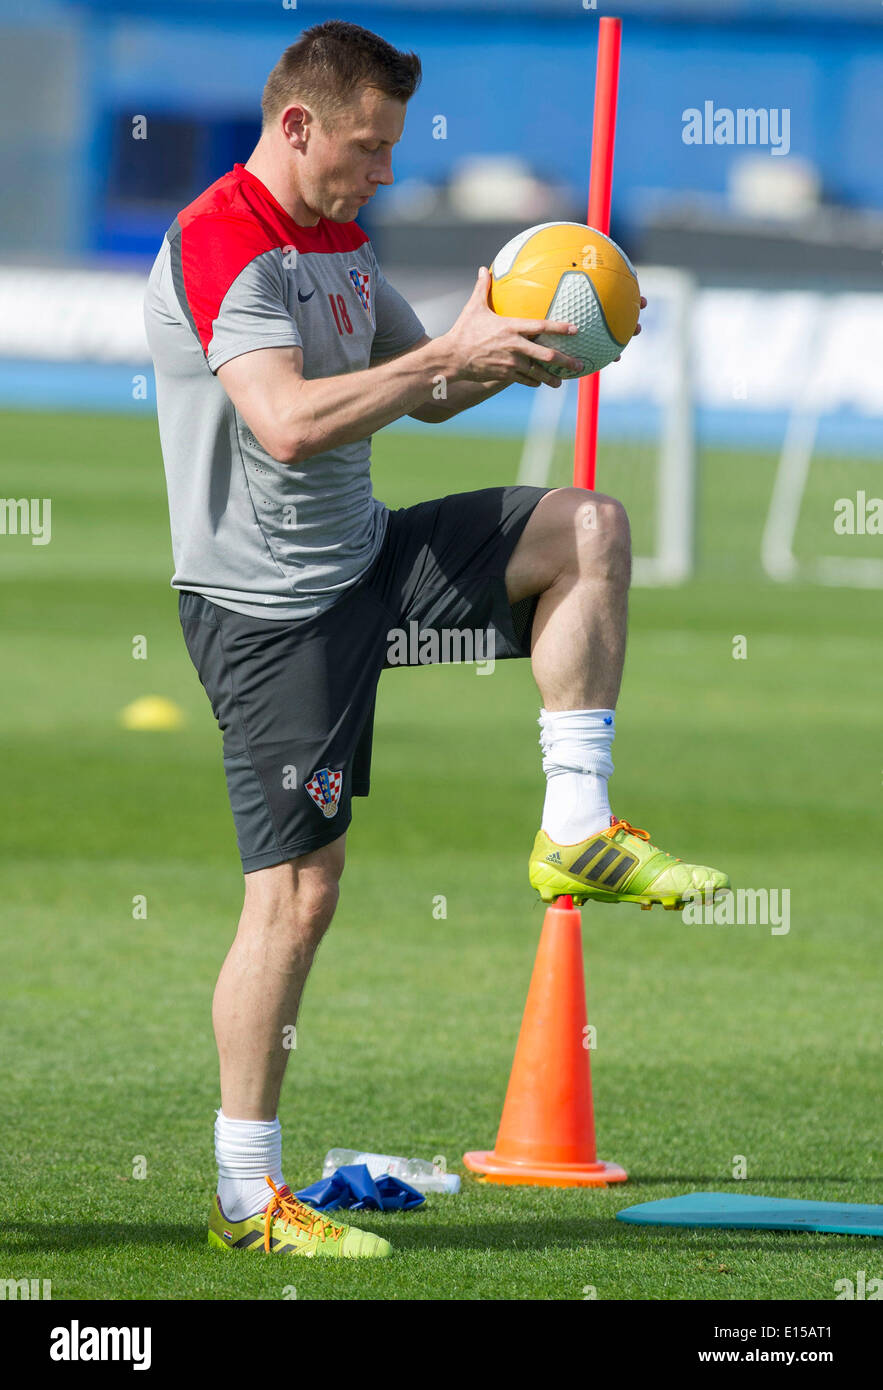 Zagreb, Croatia. 22nd May, 2014. Ivica Olic of Croatia attends a training session at Maksimir stadium in Zagreb, Croatia, May 22, 2014. Croatia national team kicked off its preparations for the upcoming FIFA World Cup Brazil 2014 and leaving for training camp in Austria on Friday. © Miso Lisanin/Xinhua/Alamy Live News Stock Photo